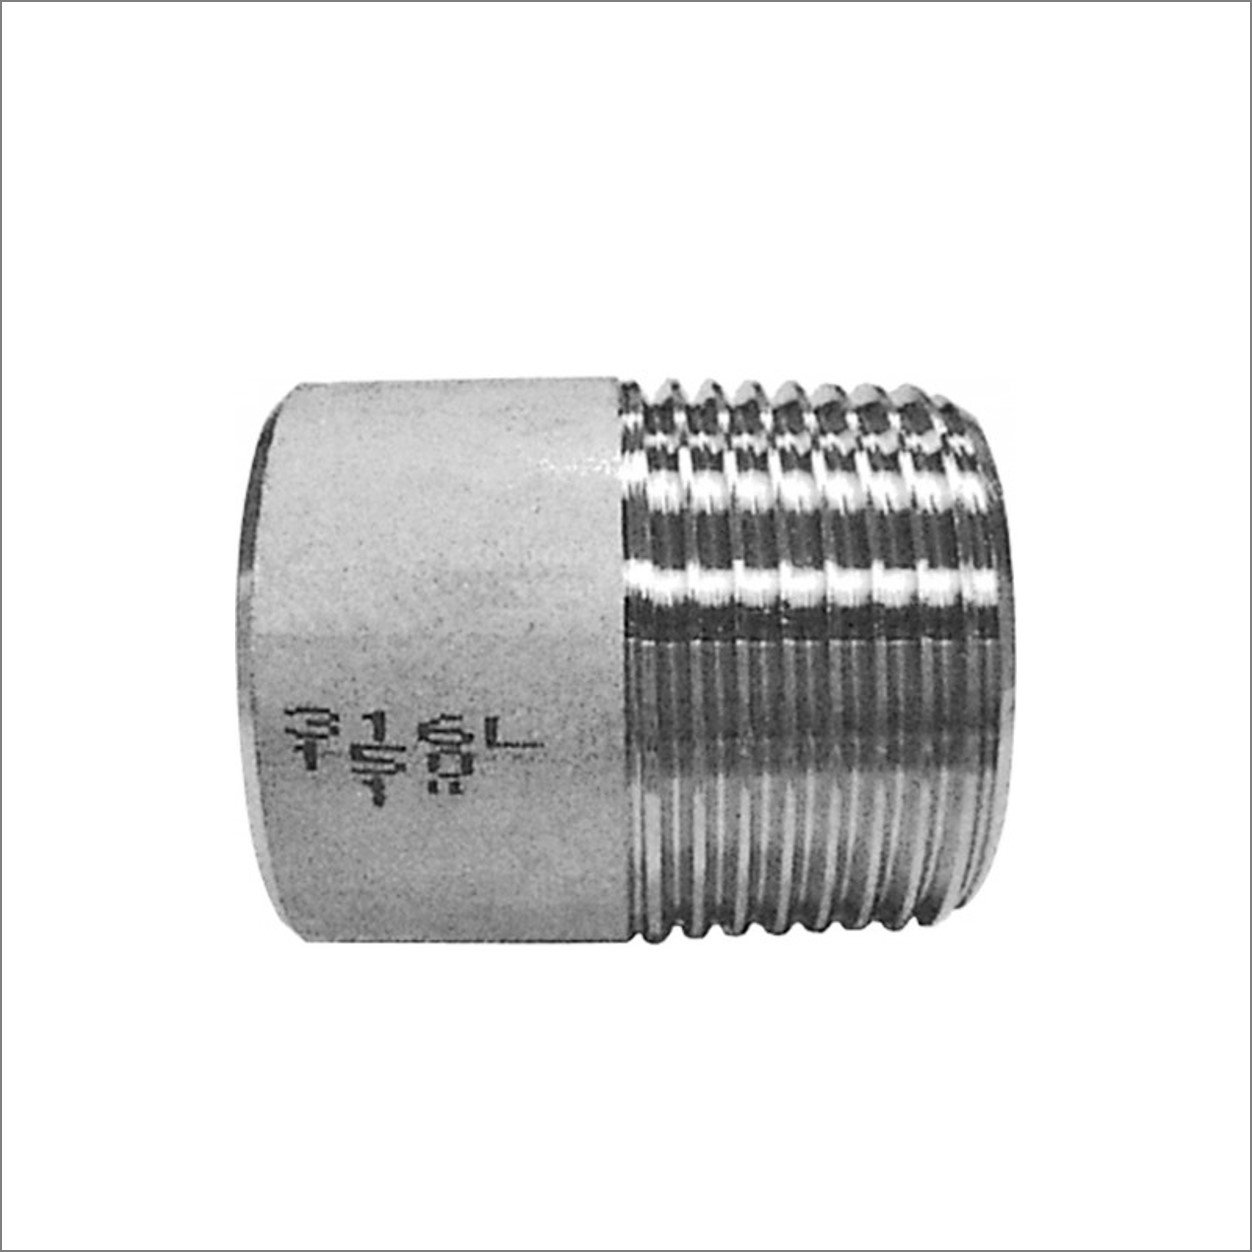 1" BSPP CLOSE NIPPLE 316 STAINLESS STEEL 150LB